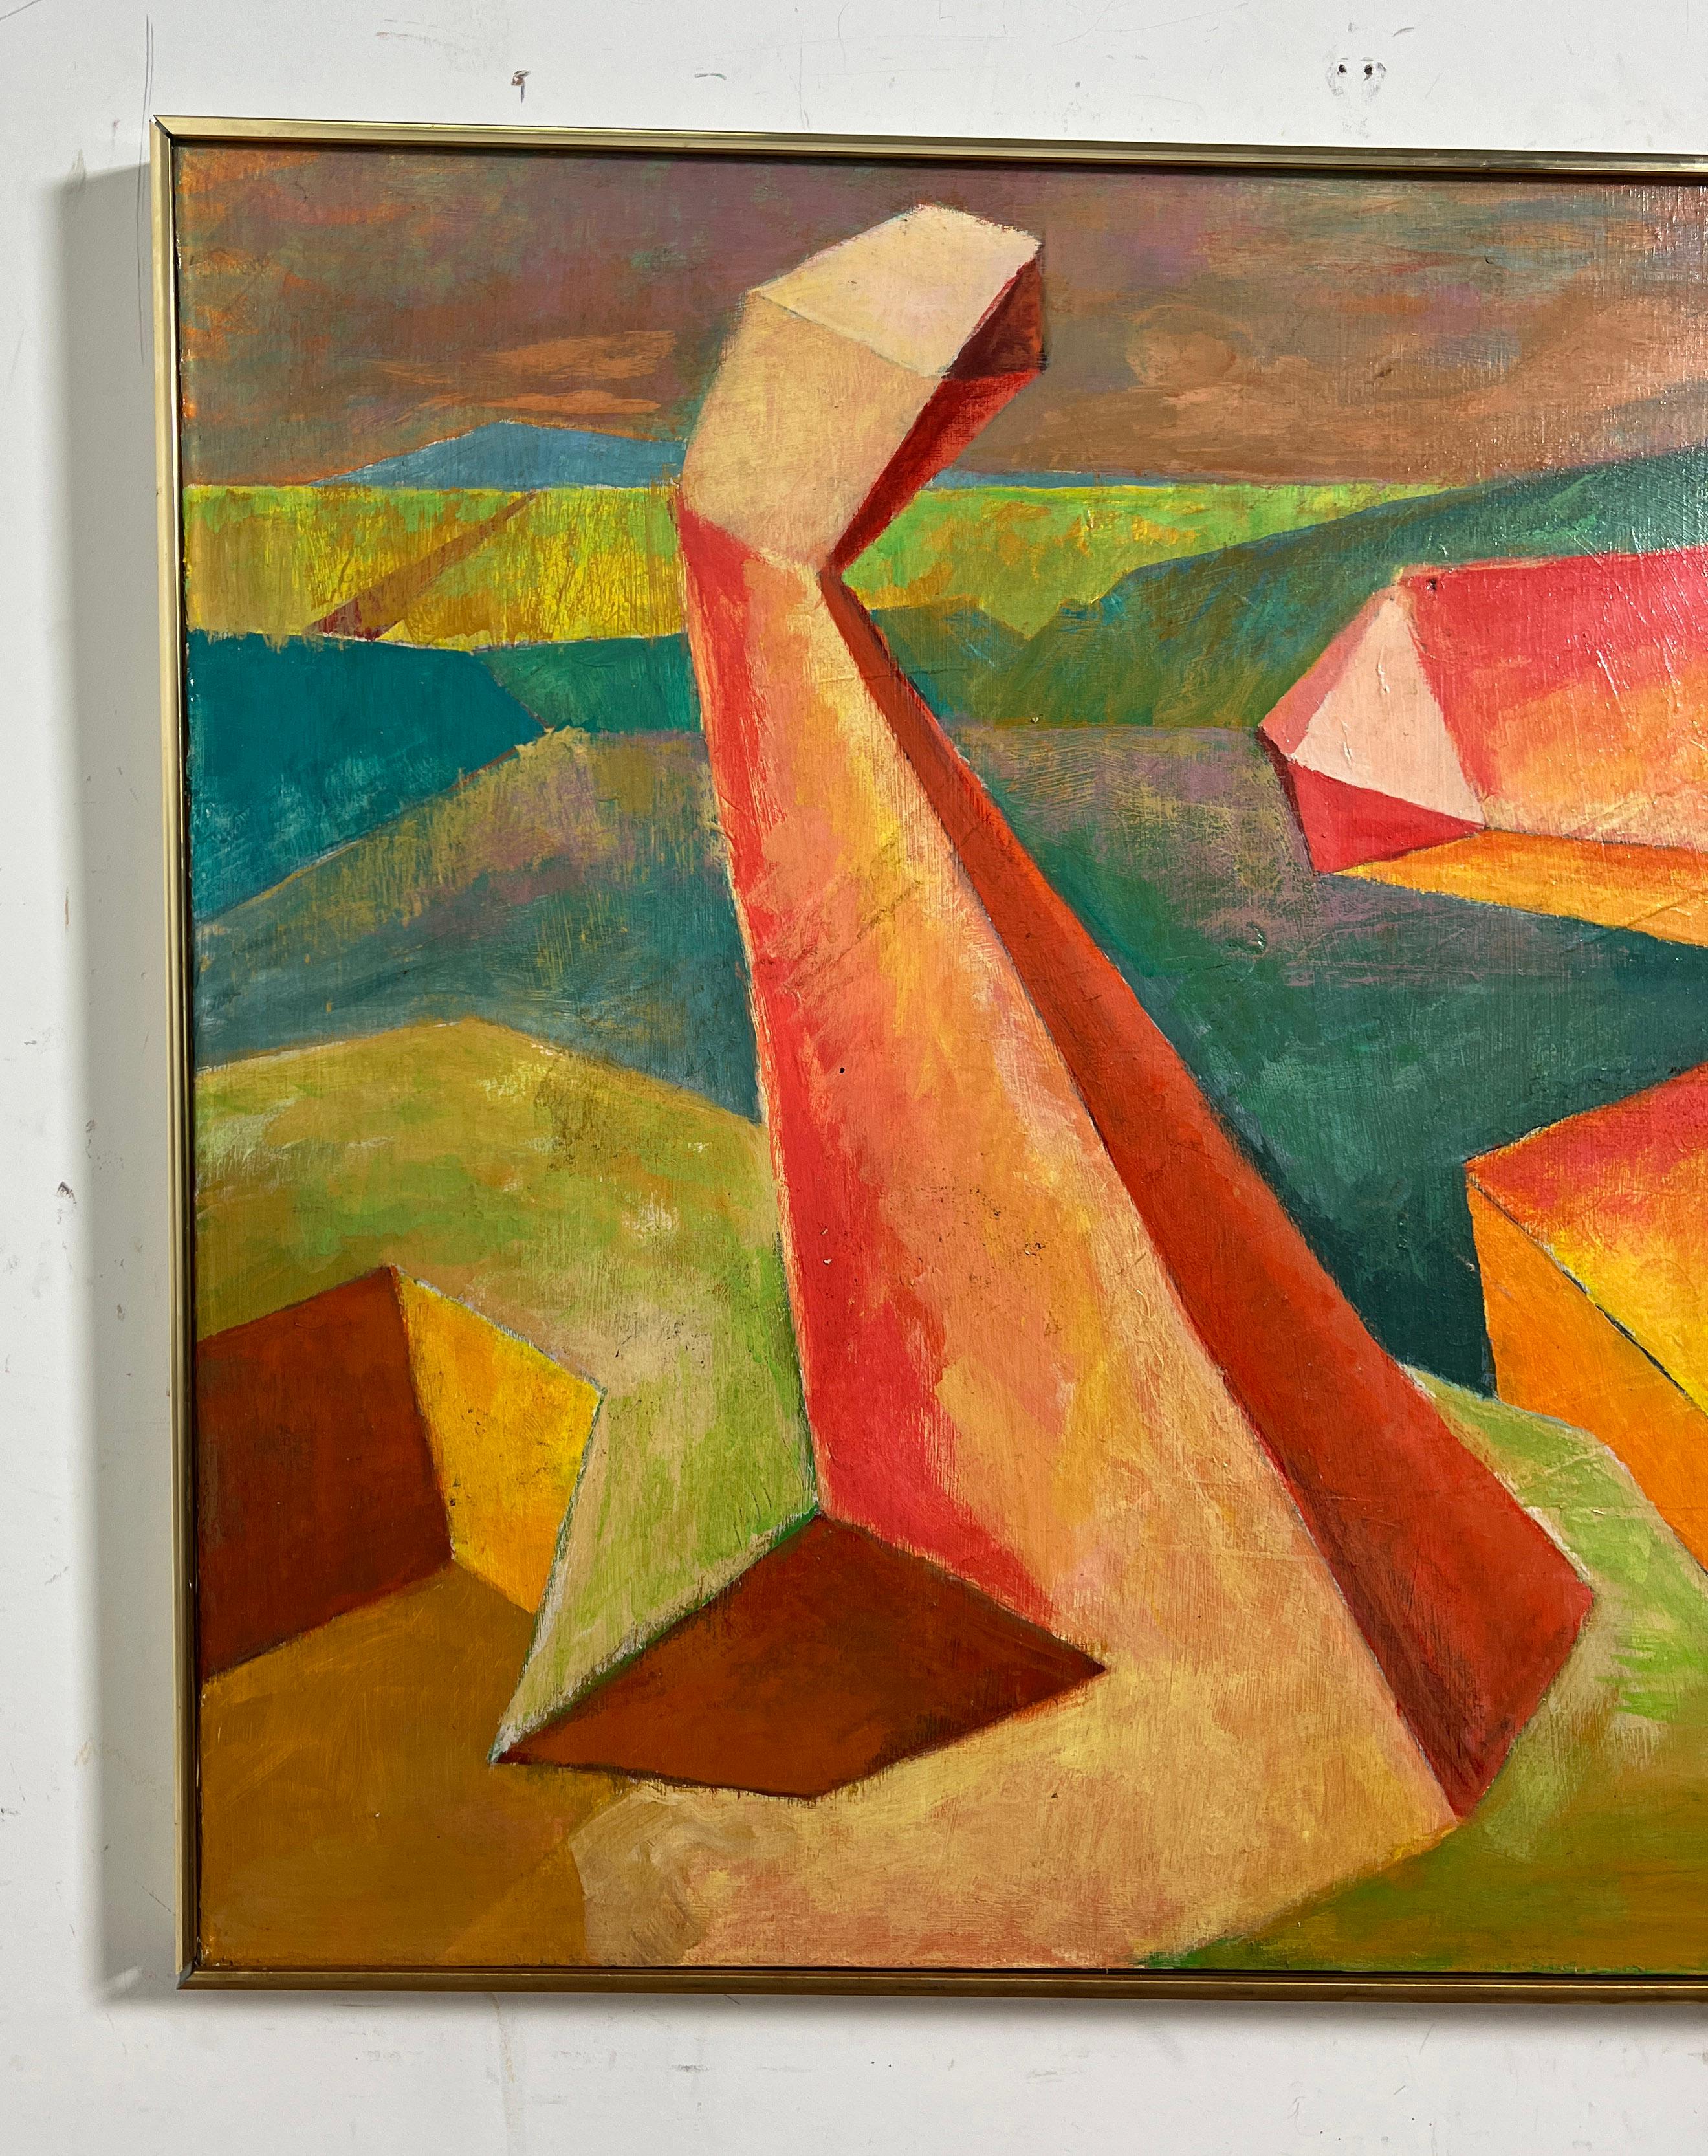 Mid-century abstract painting of a surreal landscape on canvas signed Jack Clark and dated 1972.